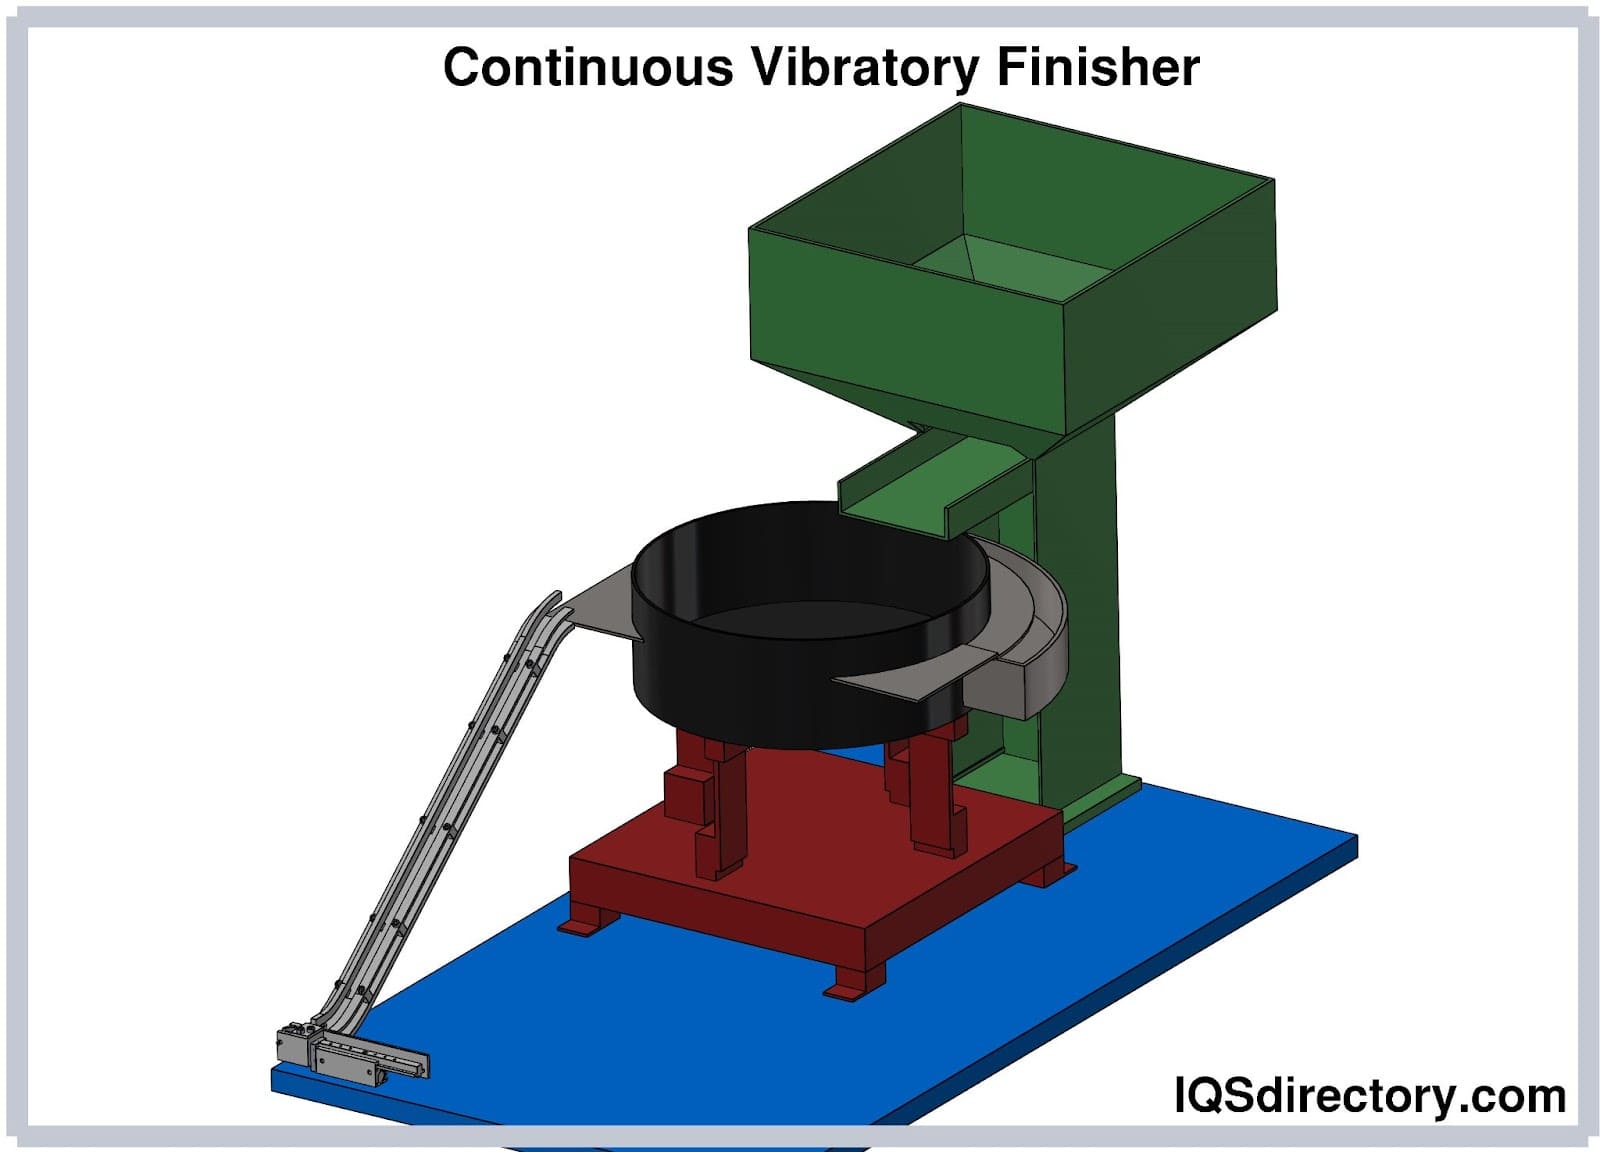 Continuous Vibratory Finisher